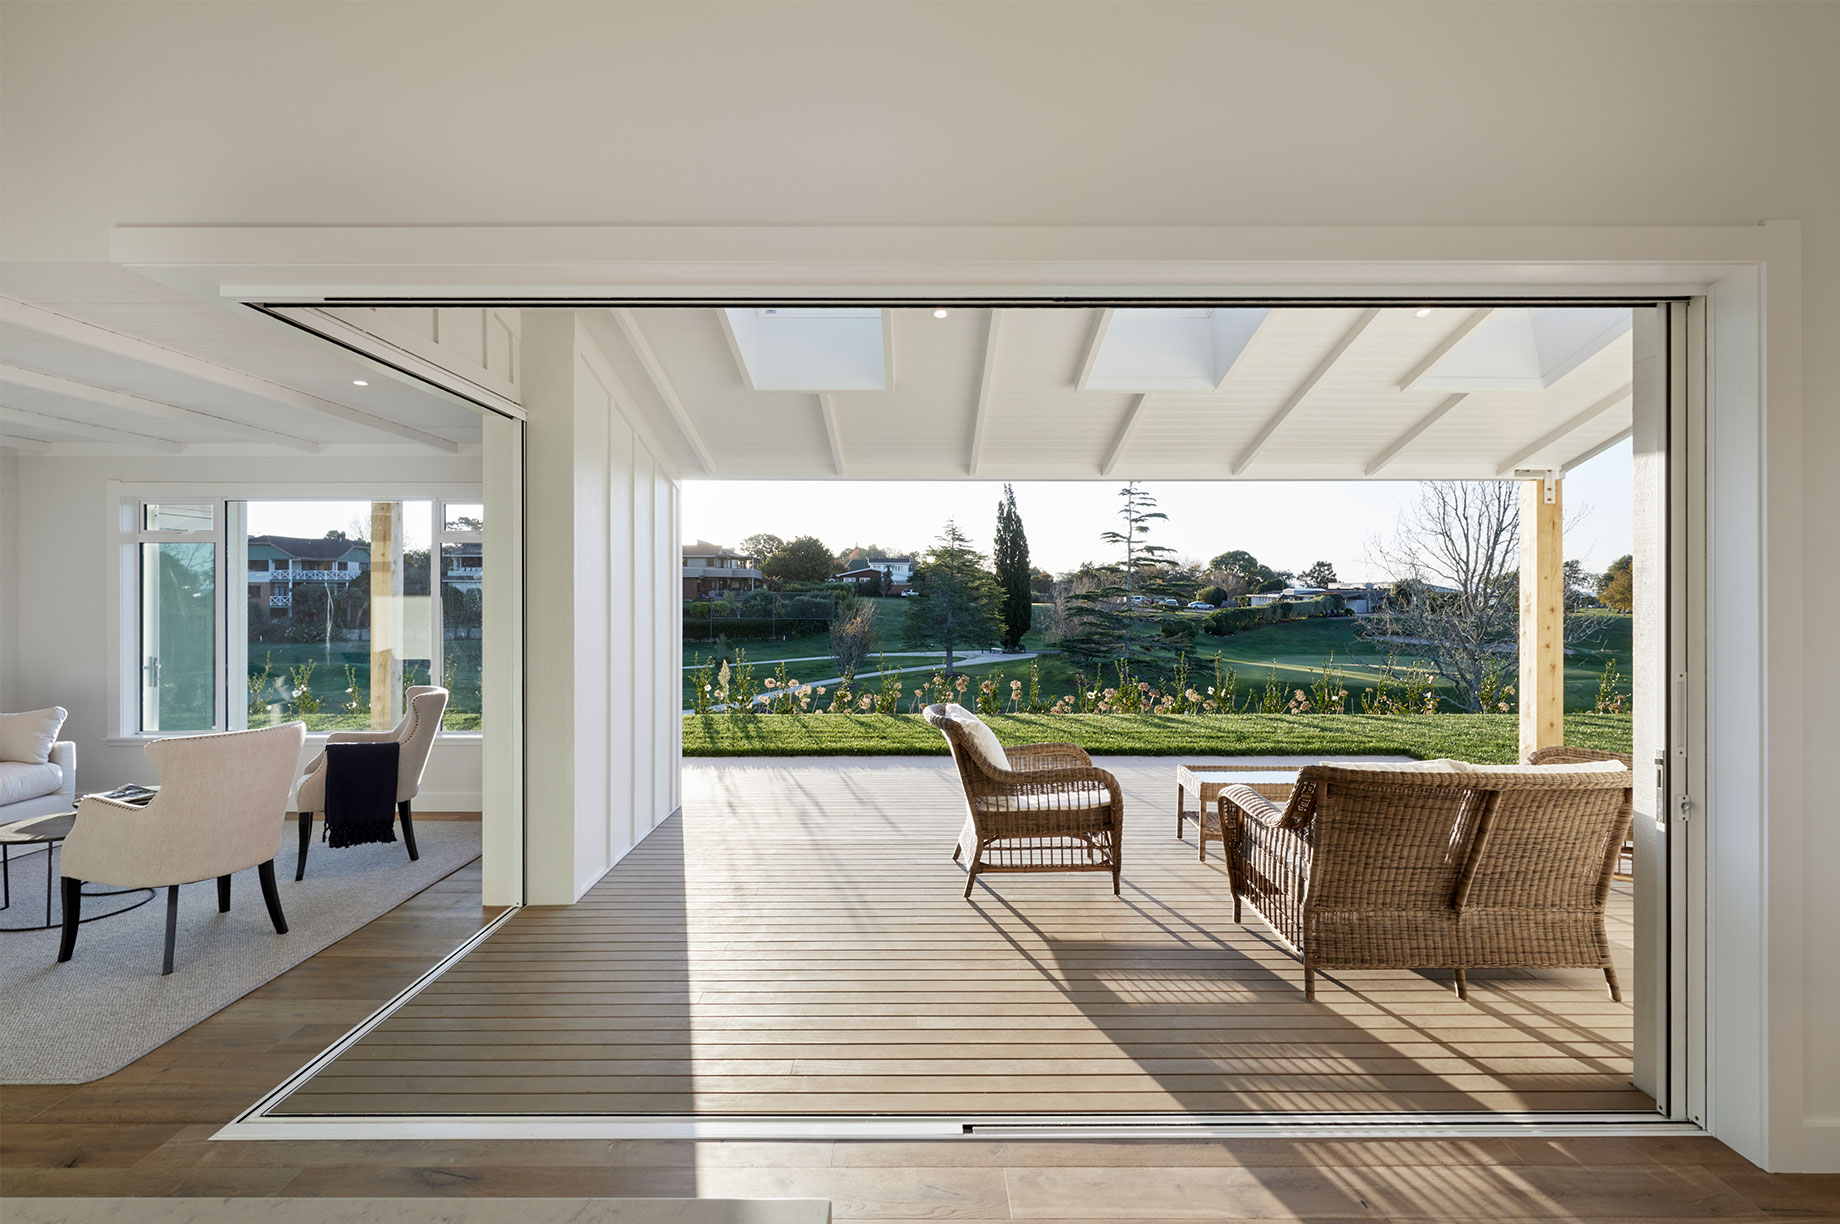 Showhome indoor-outdoor living area on a bright and sunny day